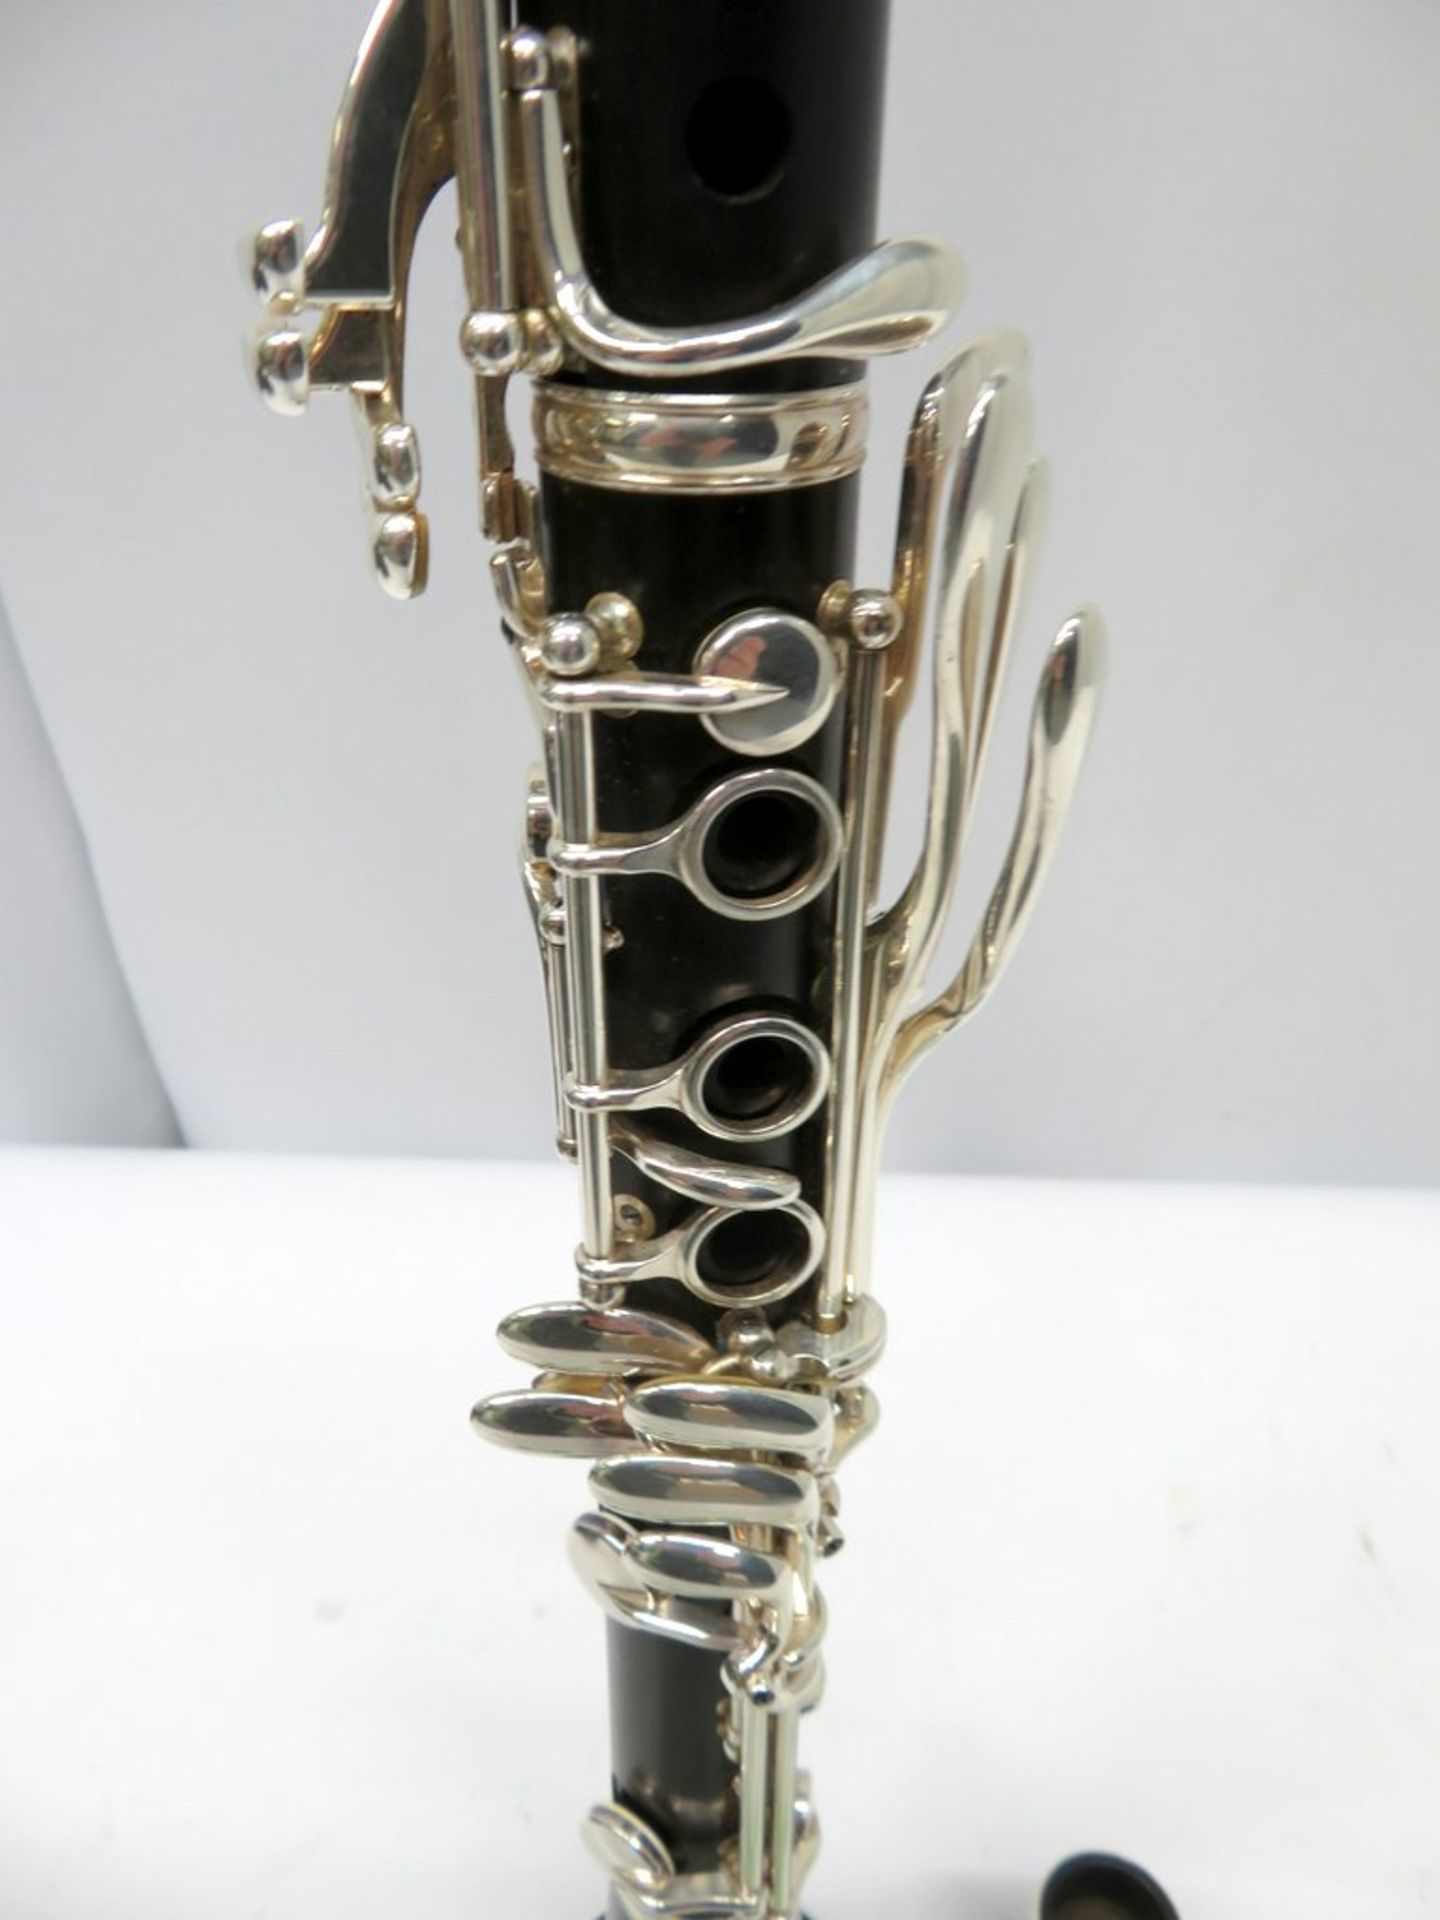 Buffet Crampon Tosca Clarinet Complete With Case. - Image 11 of 15